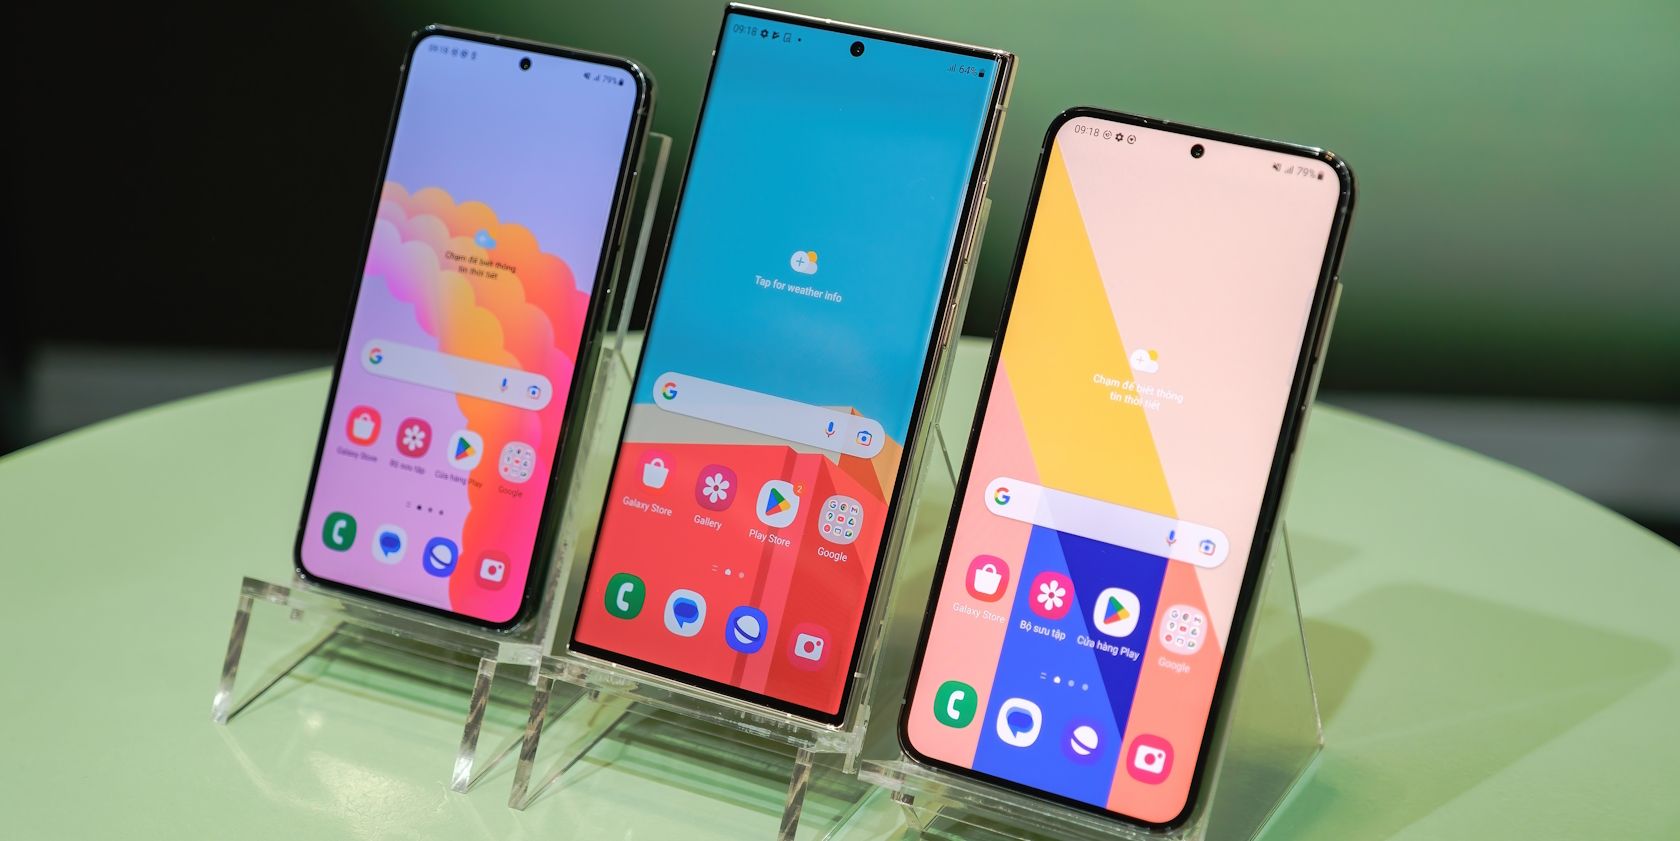 You should buy Samsung's most confusing phone this year for these reasons,  and these reasons only